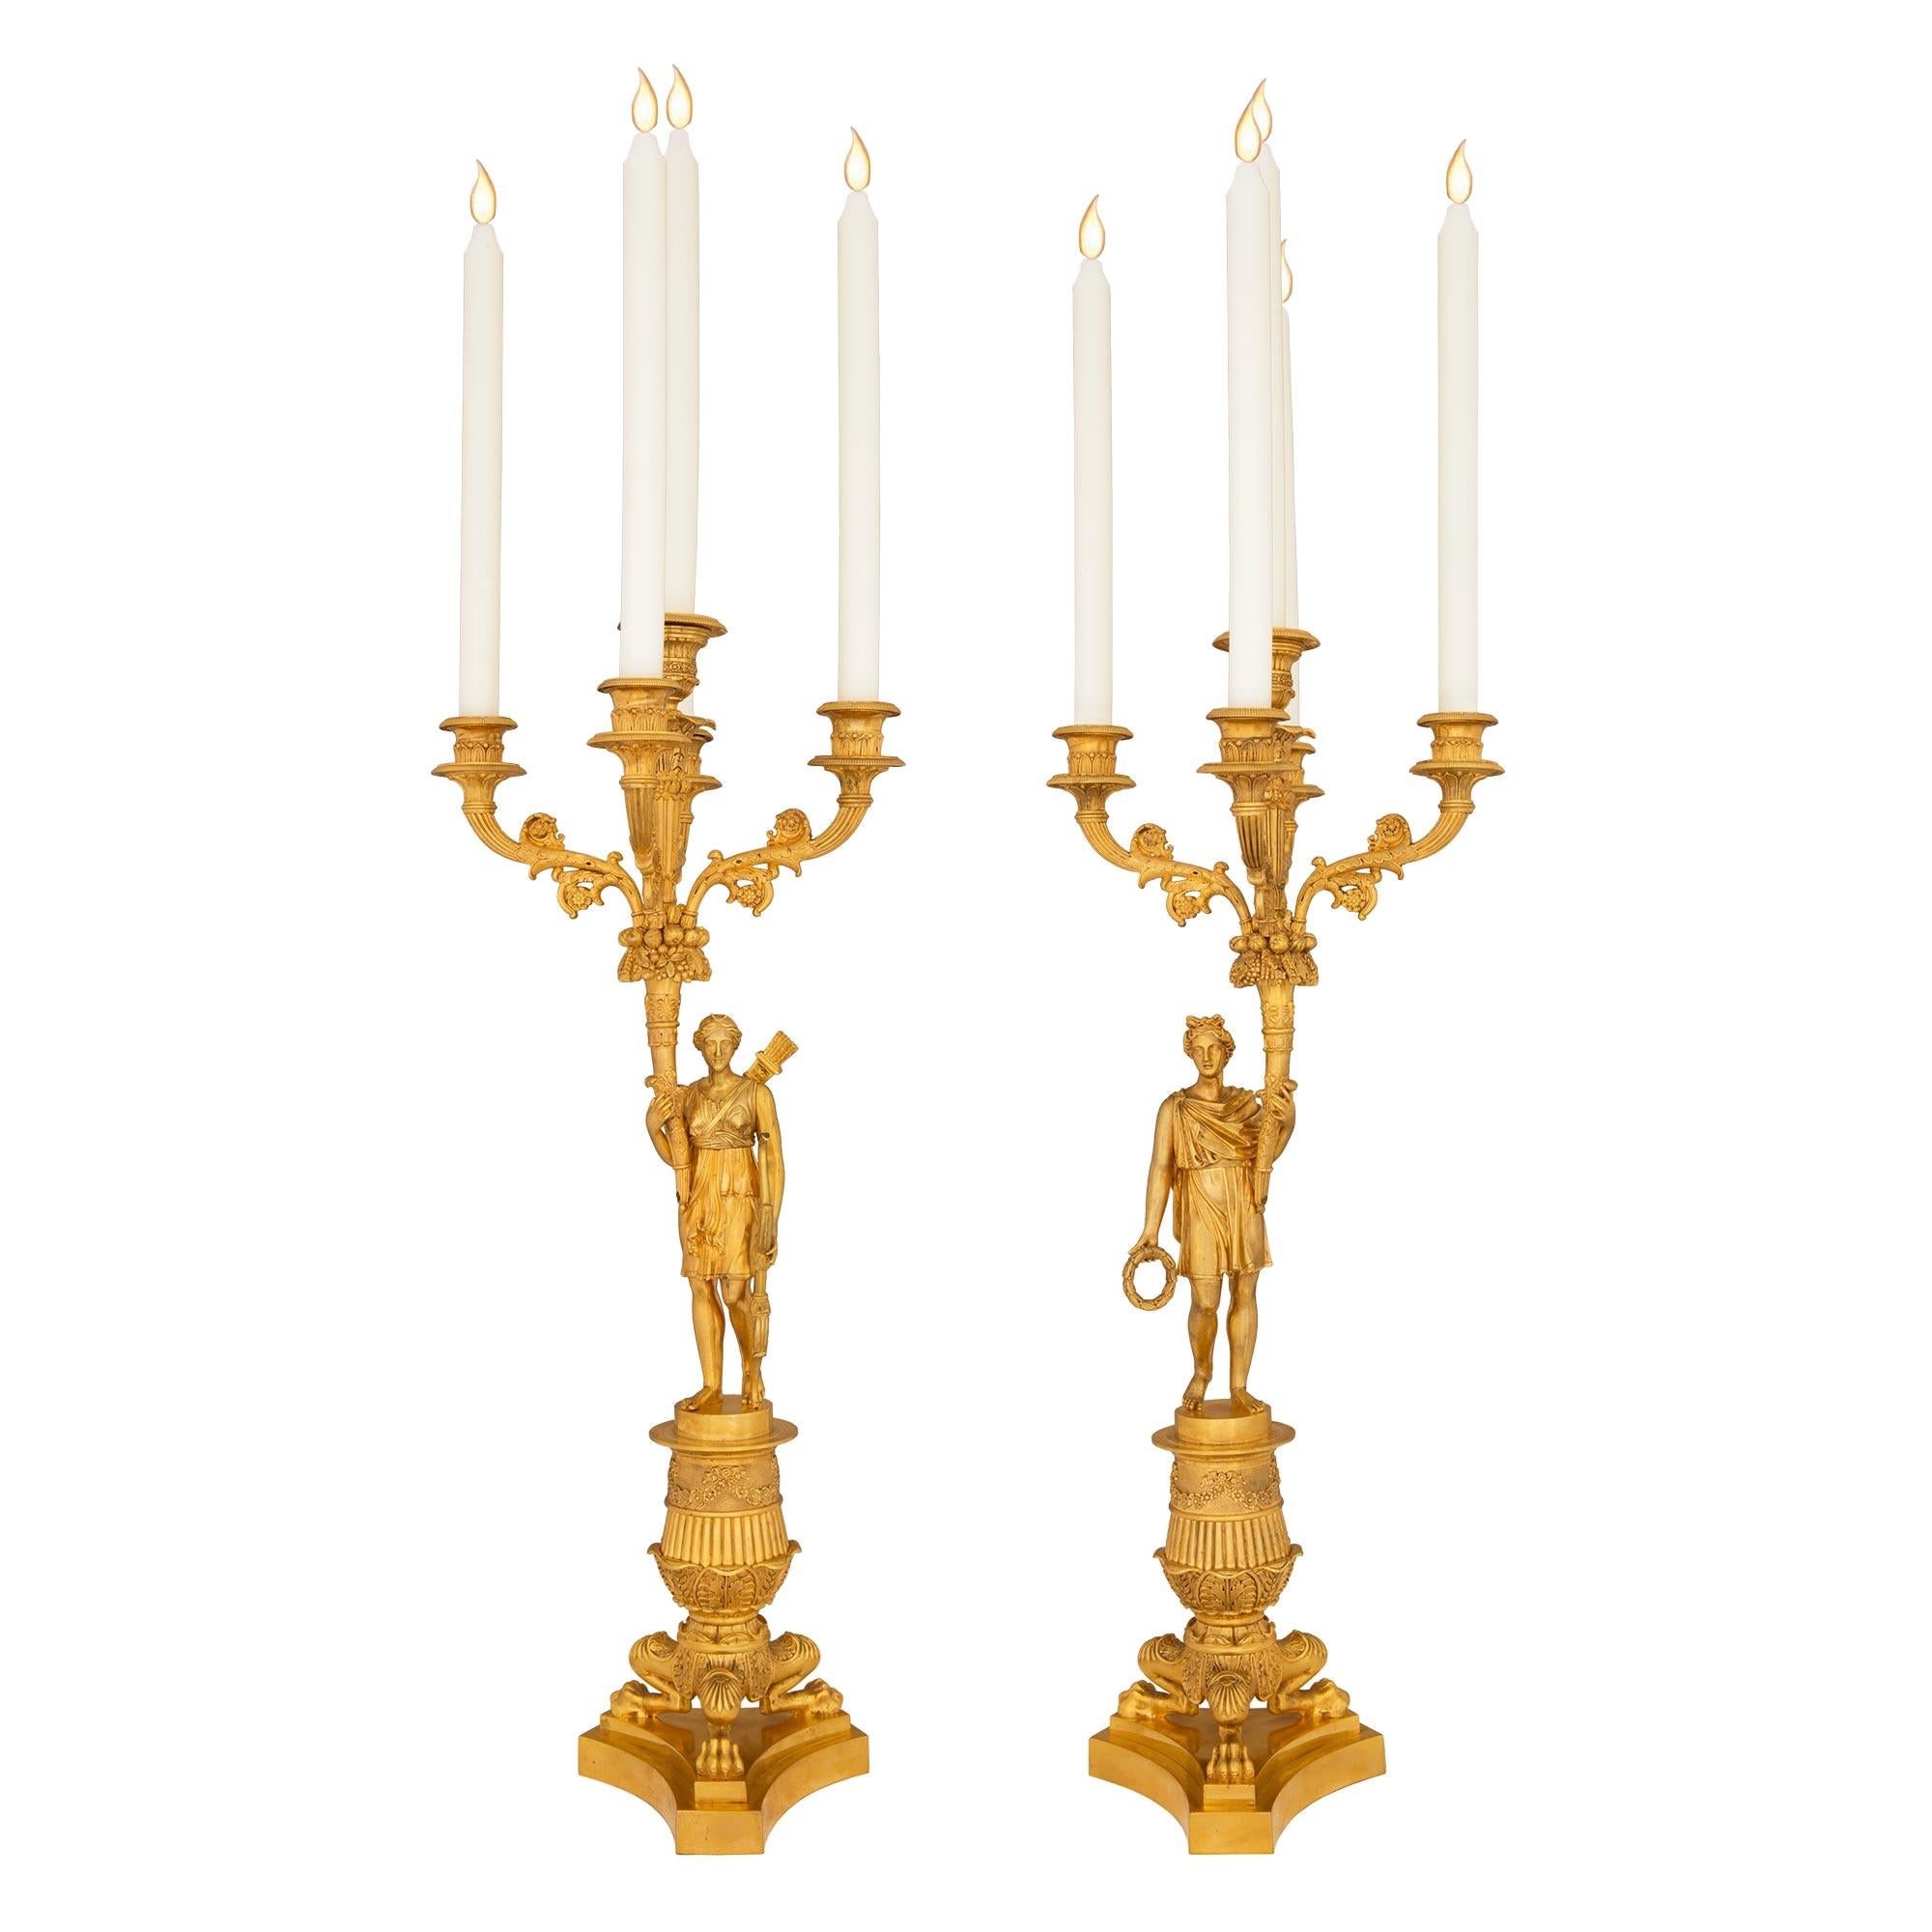 Pair of French Mid 19th Century Charles X Period Ormolu Candelabras For Sale